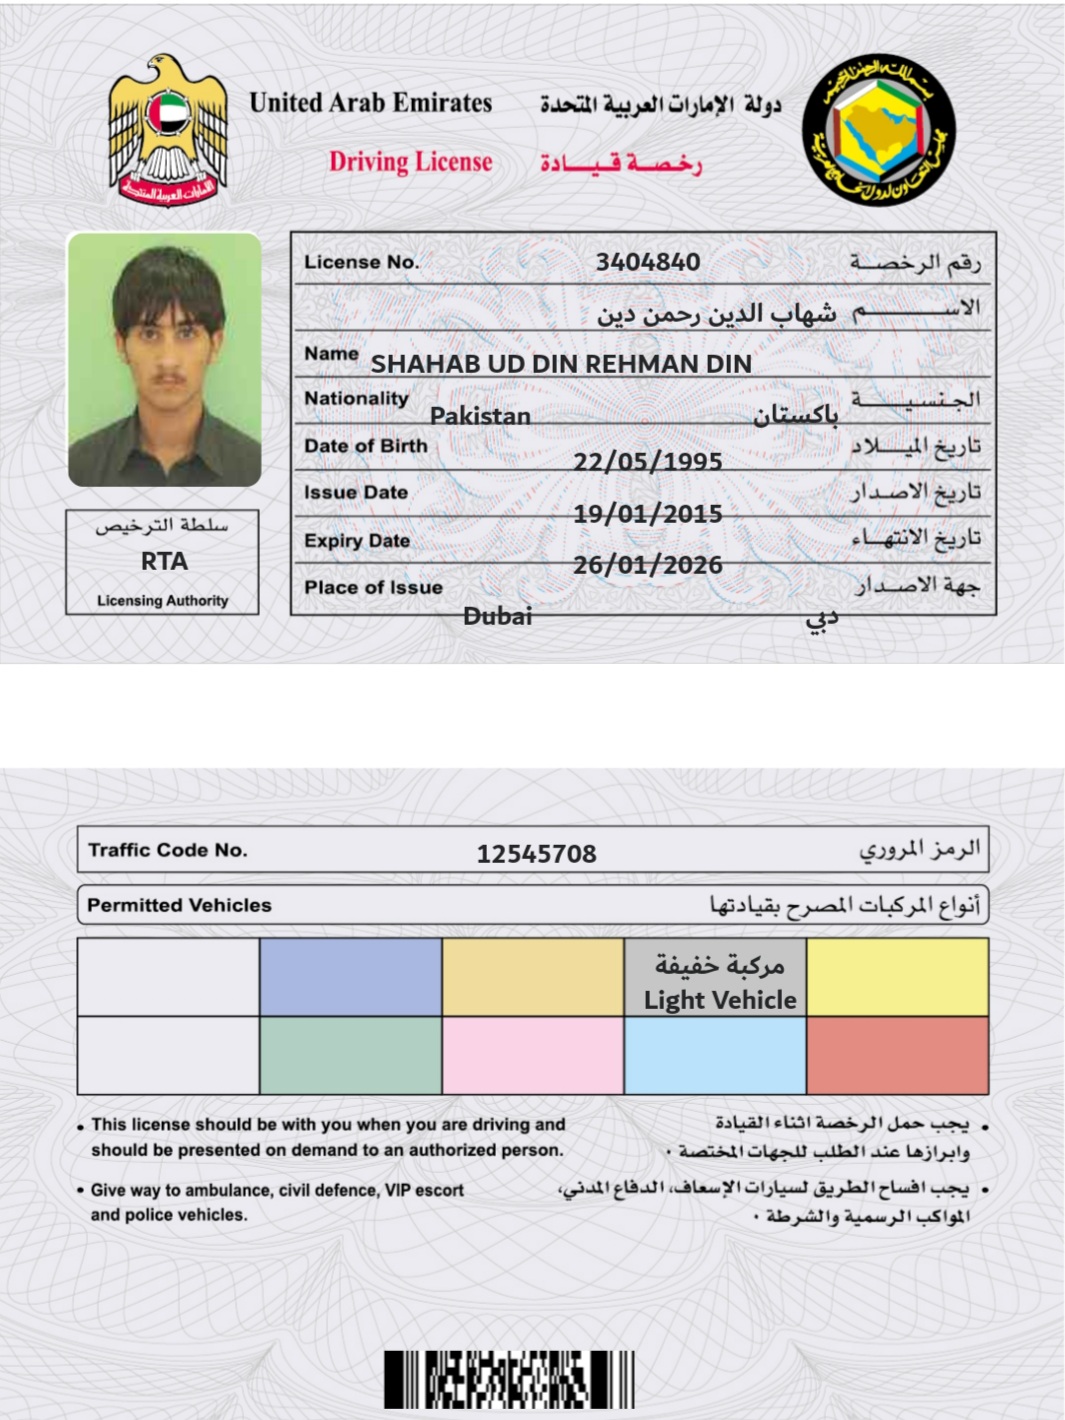 United Arab Emirates ui do ali Syle¥! dys

Driving License ~~ 3sl—d das,

   

License No.

 

023 582) oll Dla oe!
Name SHAHAB UD DIN REHMAN DIN

 

 

 

 

 

 

 

Nationality
Date of Birth

Issue Date

hal Ad Expiry Date
RTA aes
Dieting Ay Place of Issue Ak 2S J >
Traffic Code No. 12545708 $298! Sal
Permitted Vehicles 530s 7 pall LS 1 gli

 

  
   
 

 

  

Sh
Vehicle

 

« This license should be with you when you are driving and Balaal LS) dead JJ) Jas cas 0
should be presented on demand to an authorized person. + Aaland! Slgal) callal! wie Lajiuly
+ Give way to ambulance, civil defence, VIP escort (al! pI la YS sles) 3a pad plead! cms ©

and police vehicles.

Ao 2g Ruan 31 SIs

Hike ||